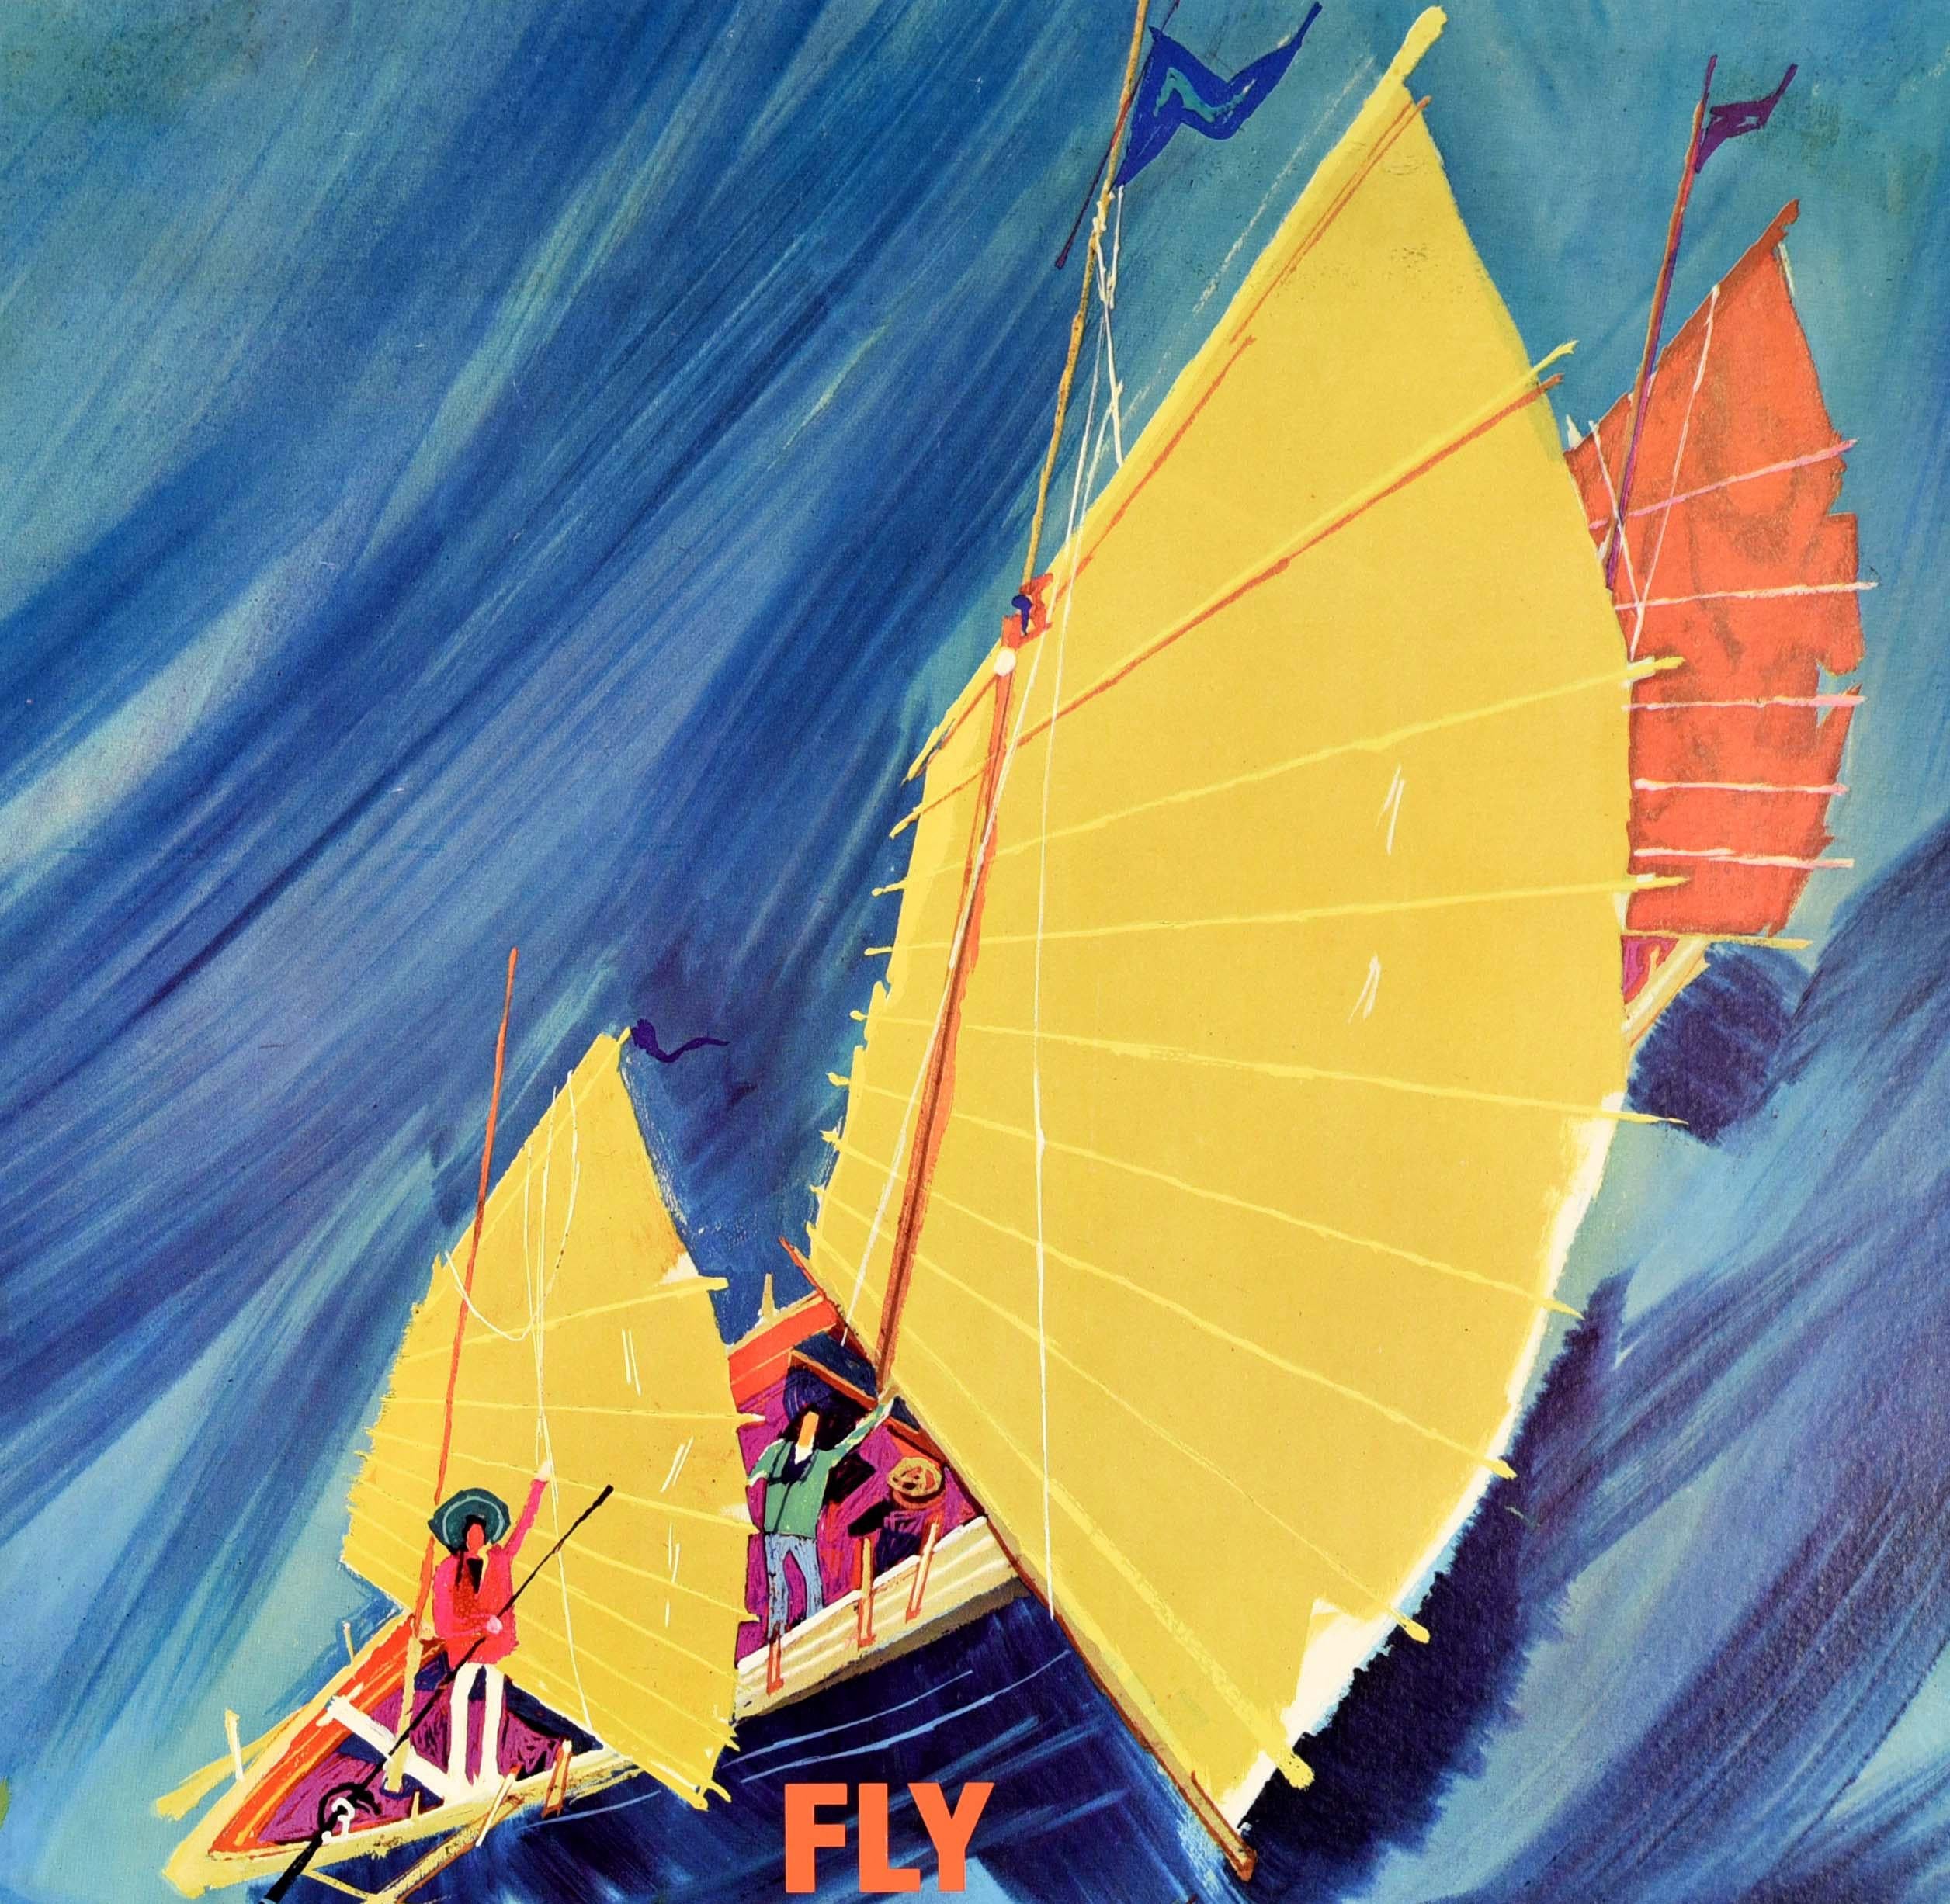 British Original Vintage Travel Poster Fly There By BOAC Airline Far East Asia Junk Boat For Sale